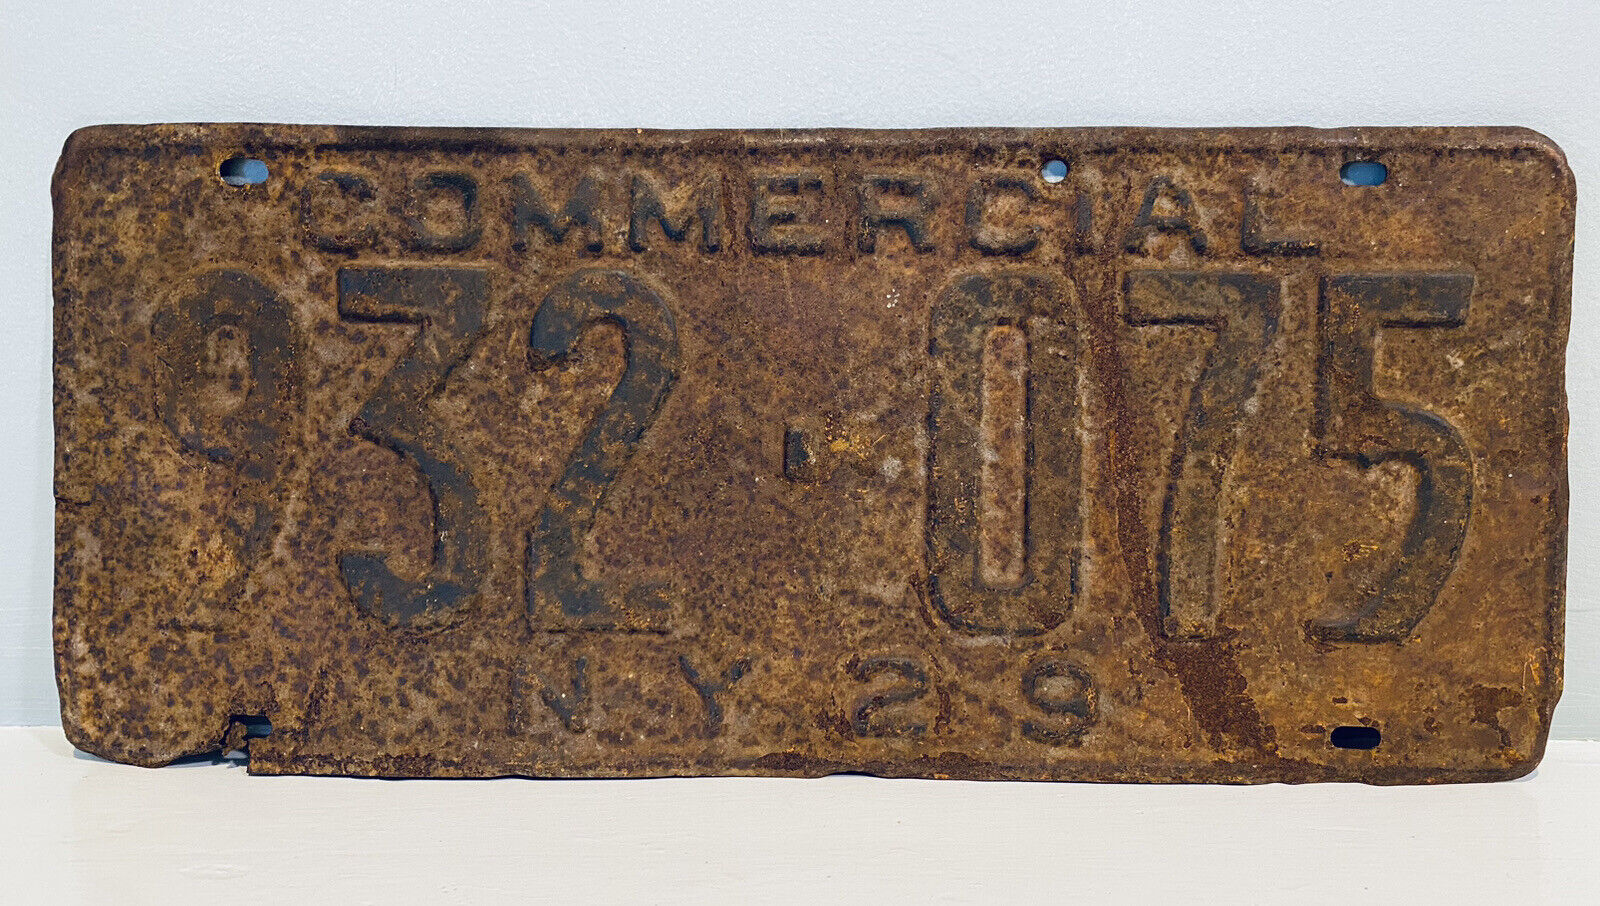 1929 New York License Plate Garage Decor Rusty Commercial Truck 932-075 NRP